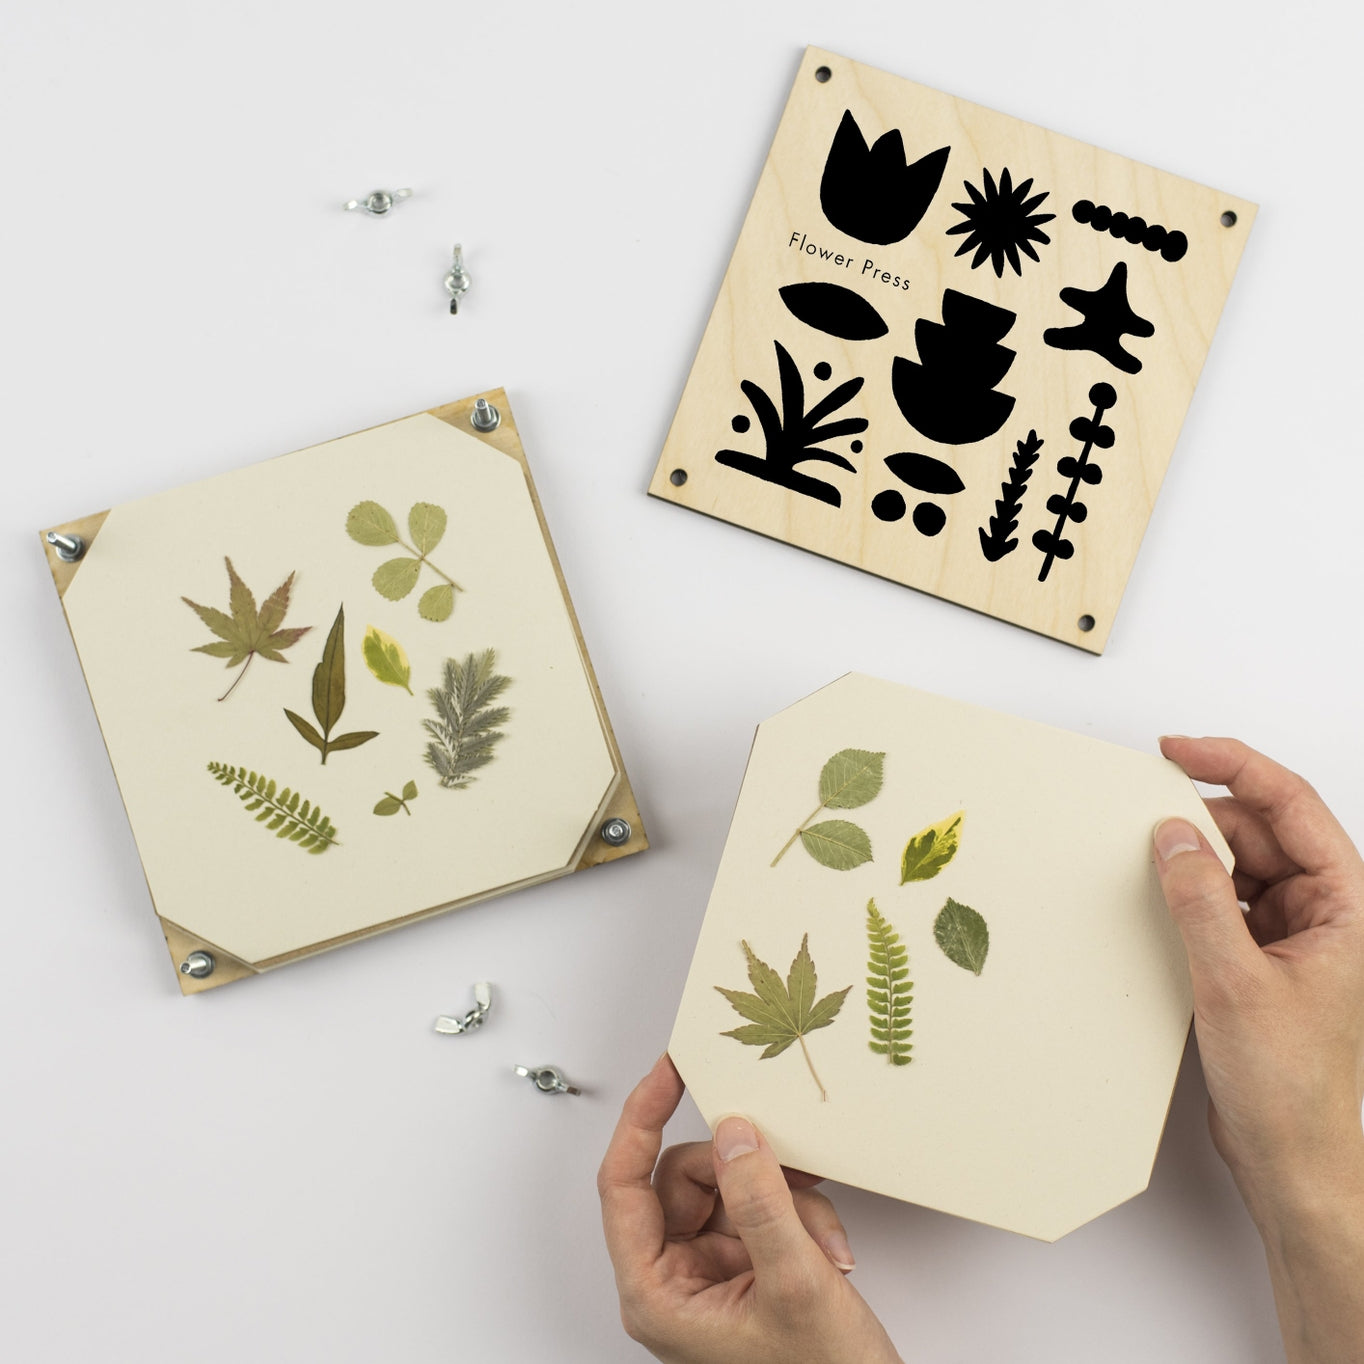 This well-sized flower press allows you to preserve the flowers and leaves you find while out on your wonders. The press comes complete with 5 sheets of corrugated card and 8 of sugar paper to give ample space to press flowers. 